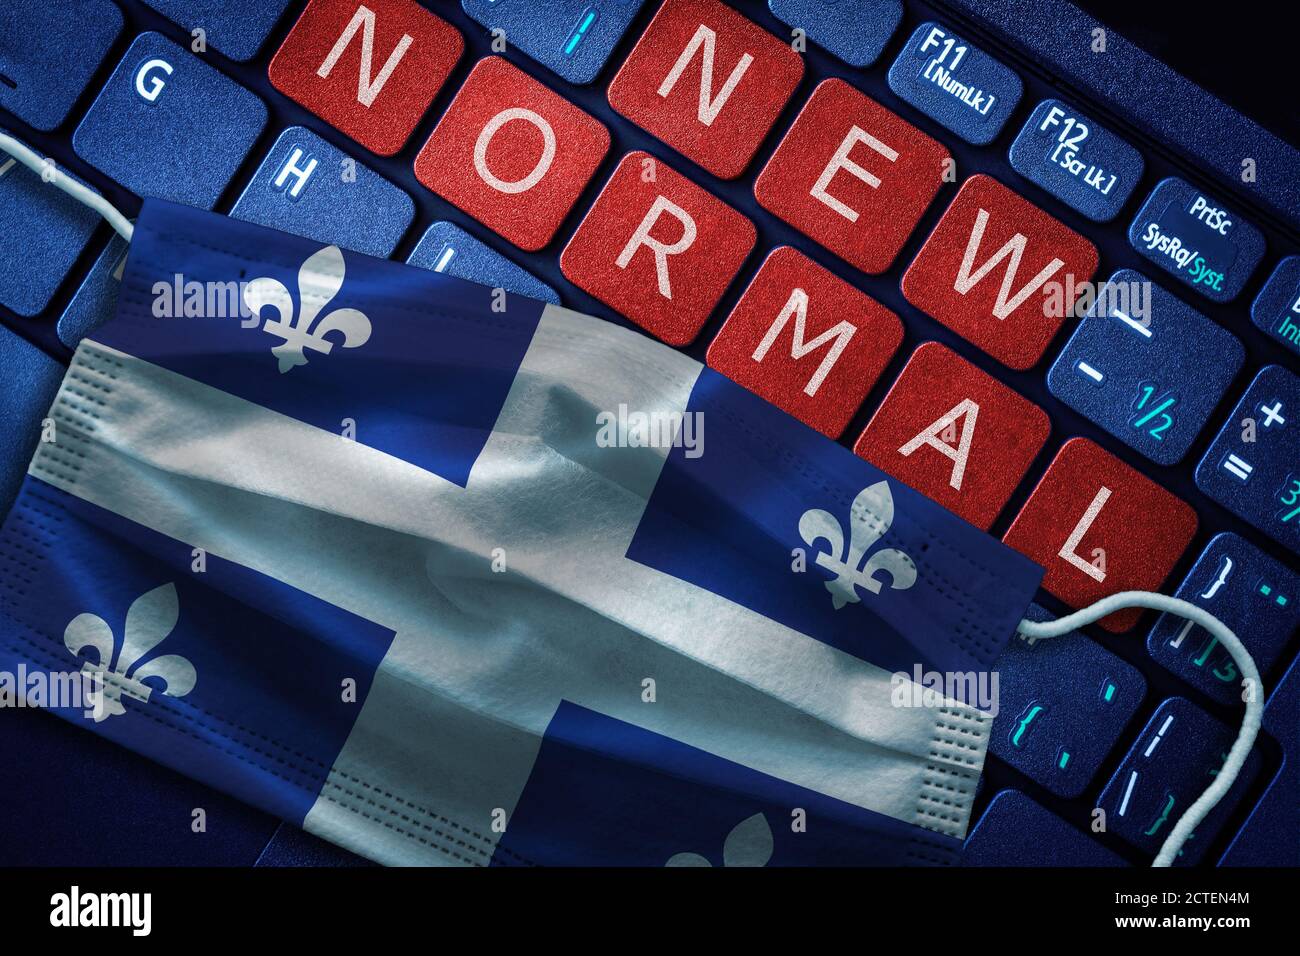 COVID-19 coronavirus new normal concept in the Canadian province of Quebec as shown by Quebec flag on face mask with New Normal on laptop red alert ke Stock Photo